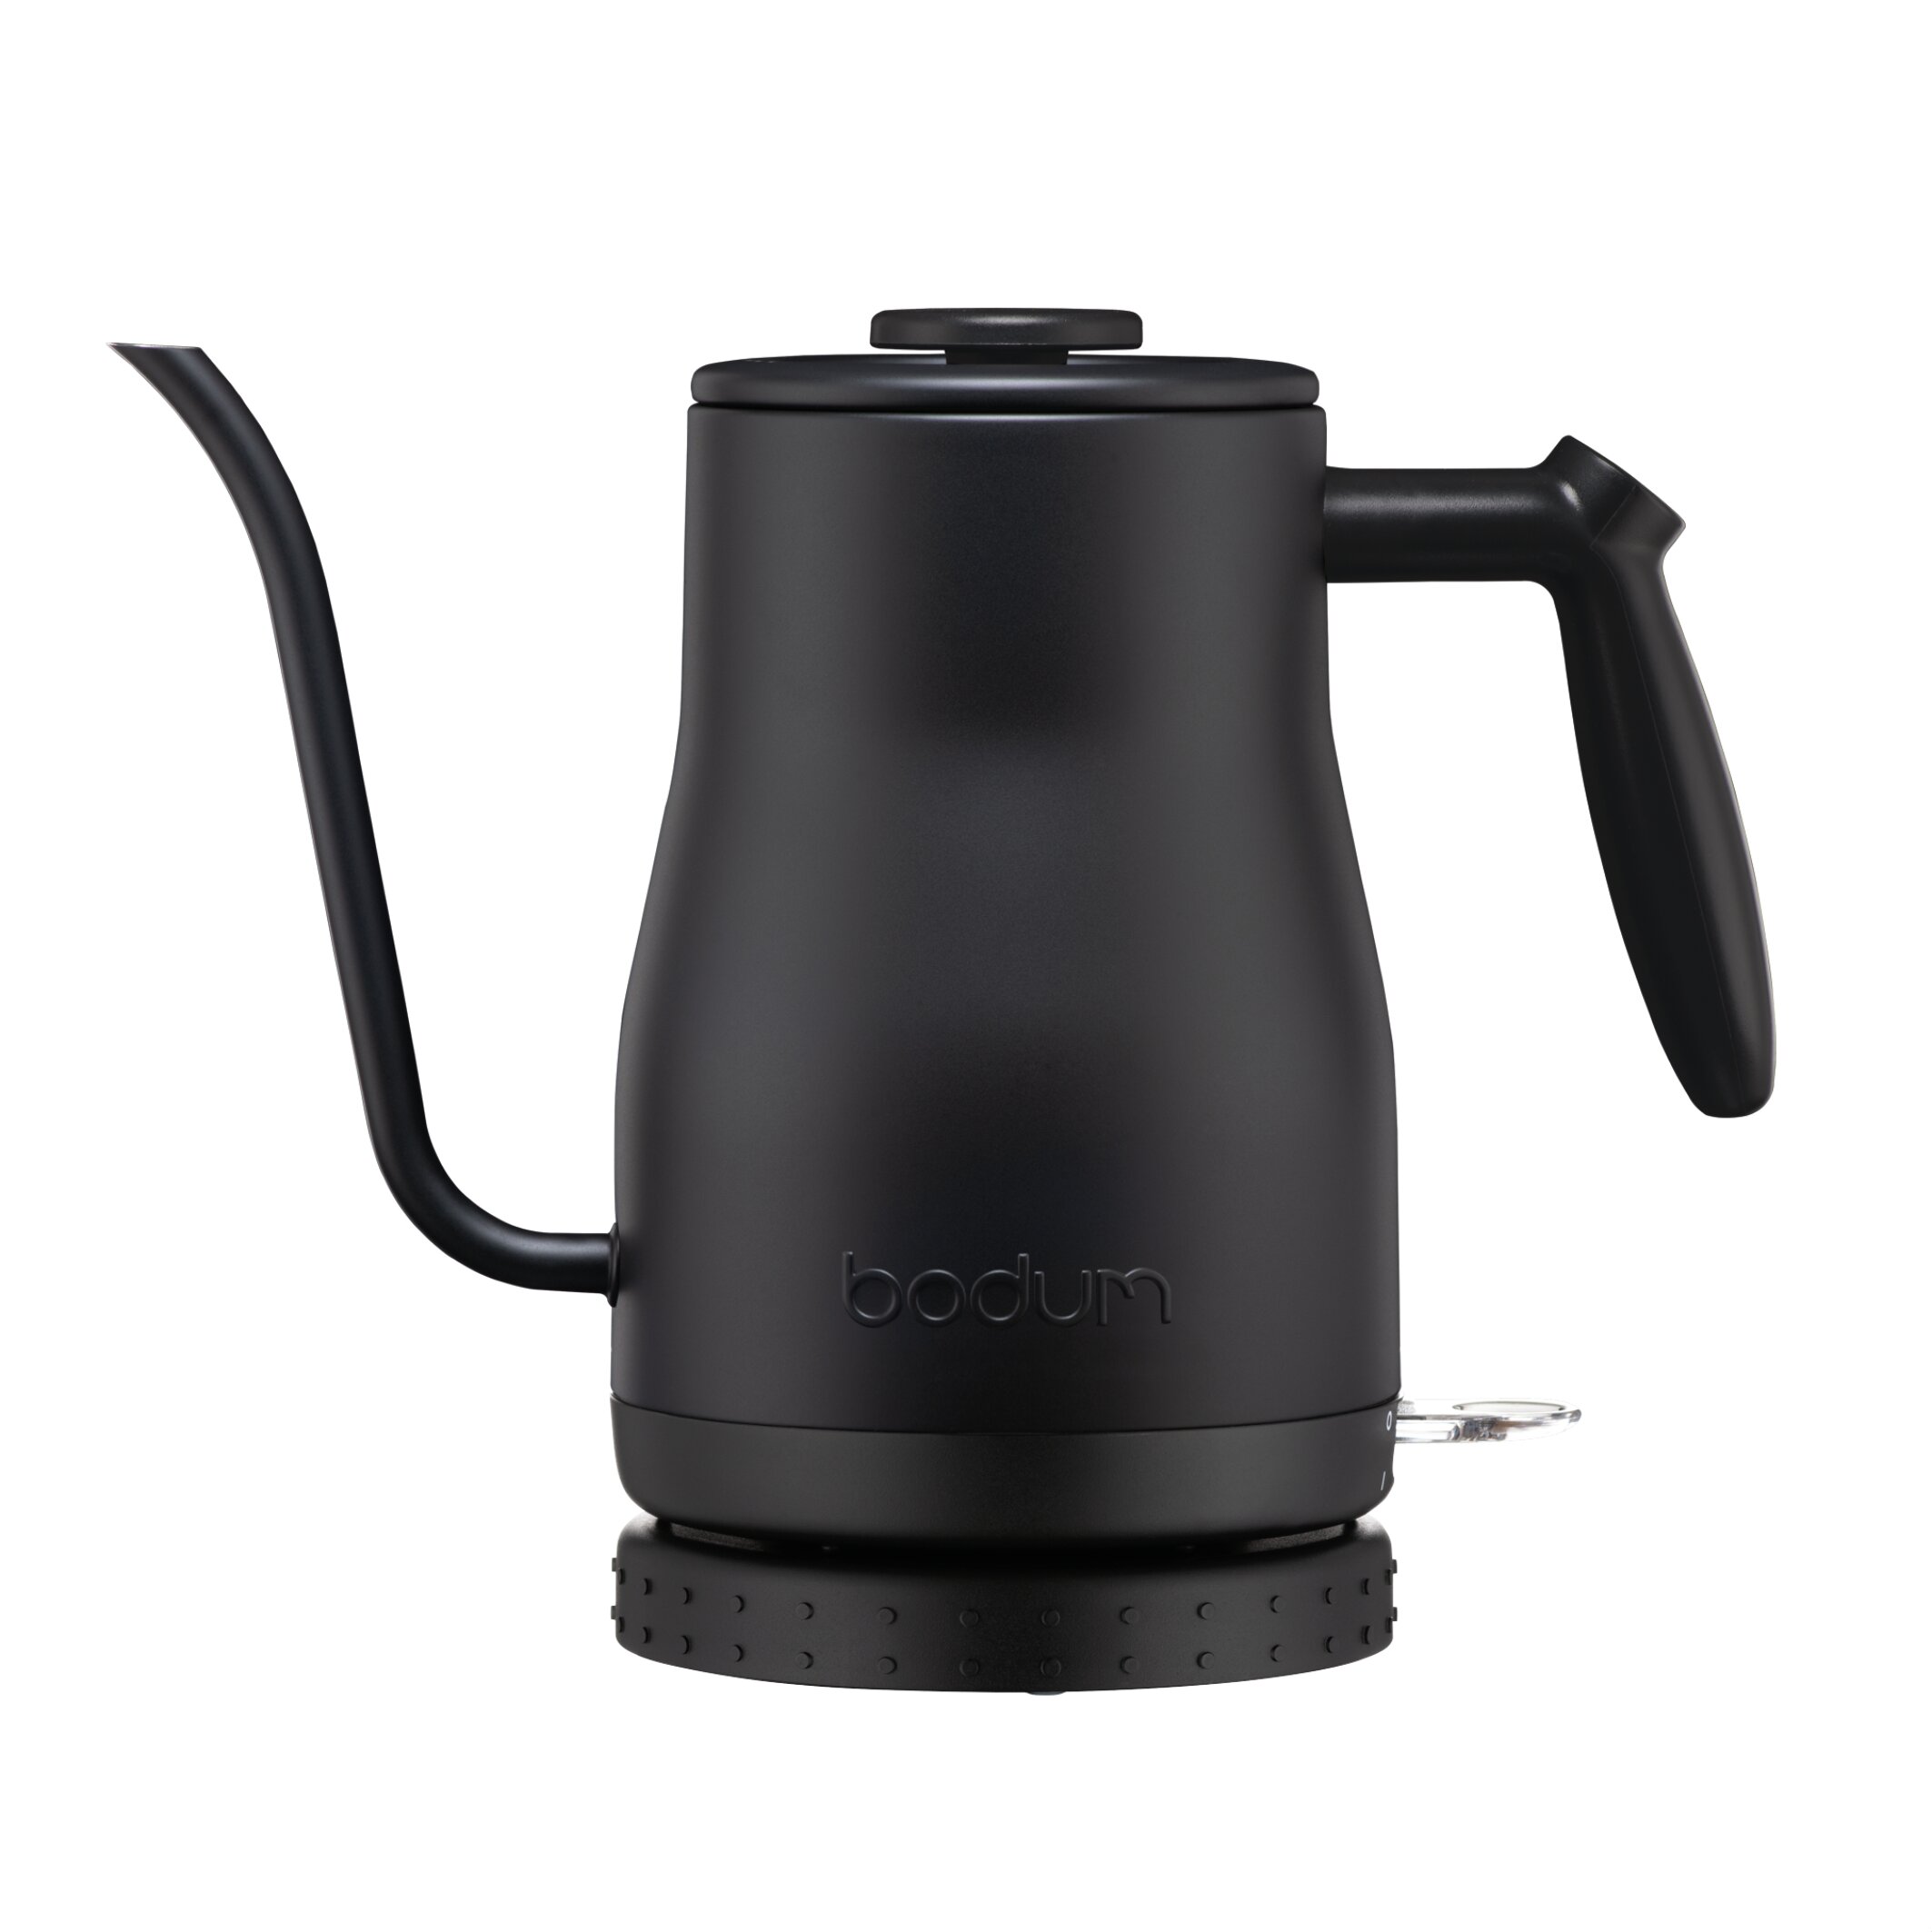 Aroma 1.7L Stainless Steel Electric Kettle 9 12 H x 8 34 W x 6 D